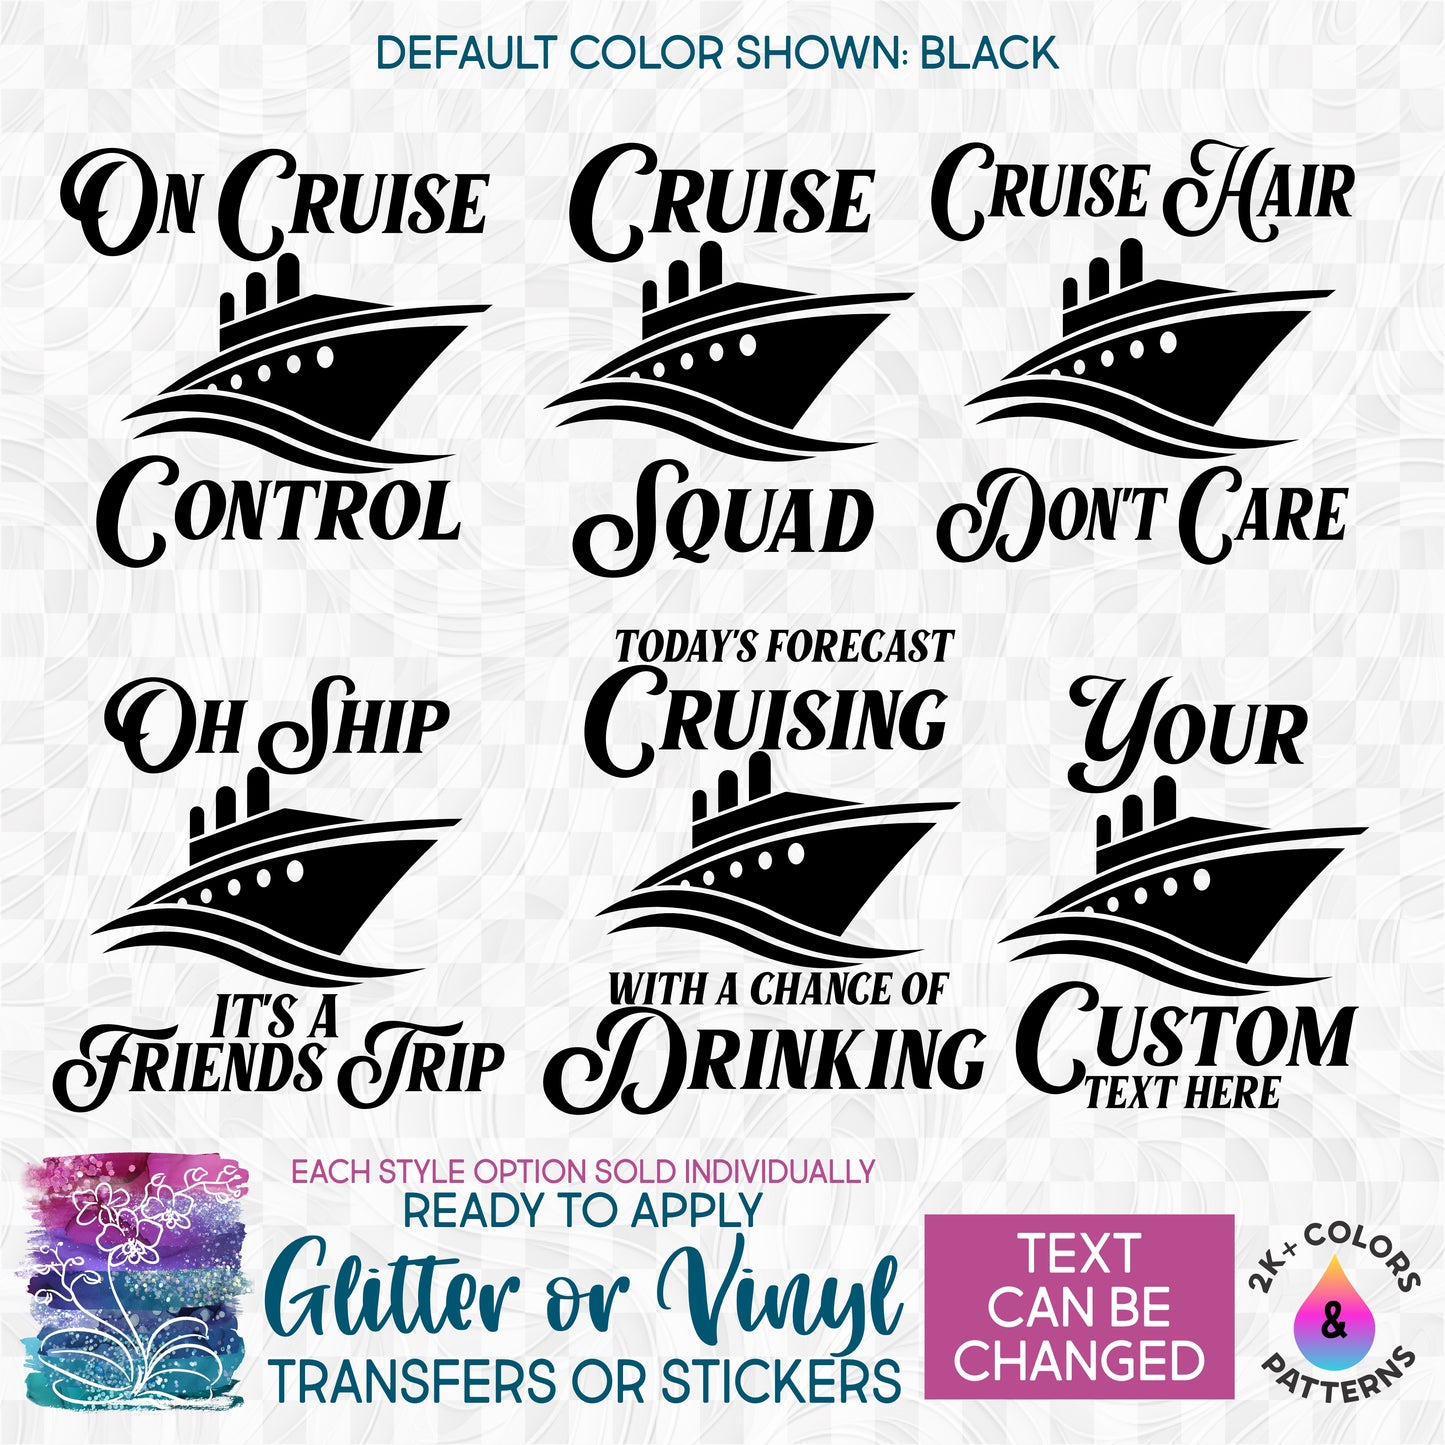 (s303-1J) Cruise Hair Don't Care On Cruise Control Cruise Squad Family Cruise Oh Ship Glitter or Vinyl Iron-On Transfer or Sticker